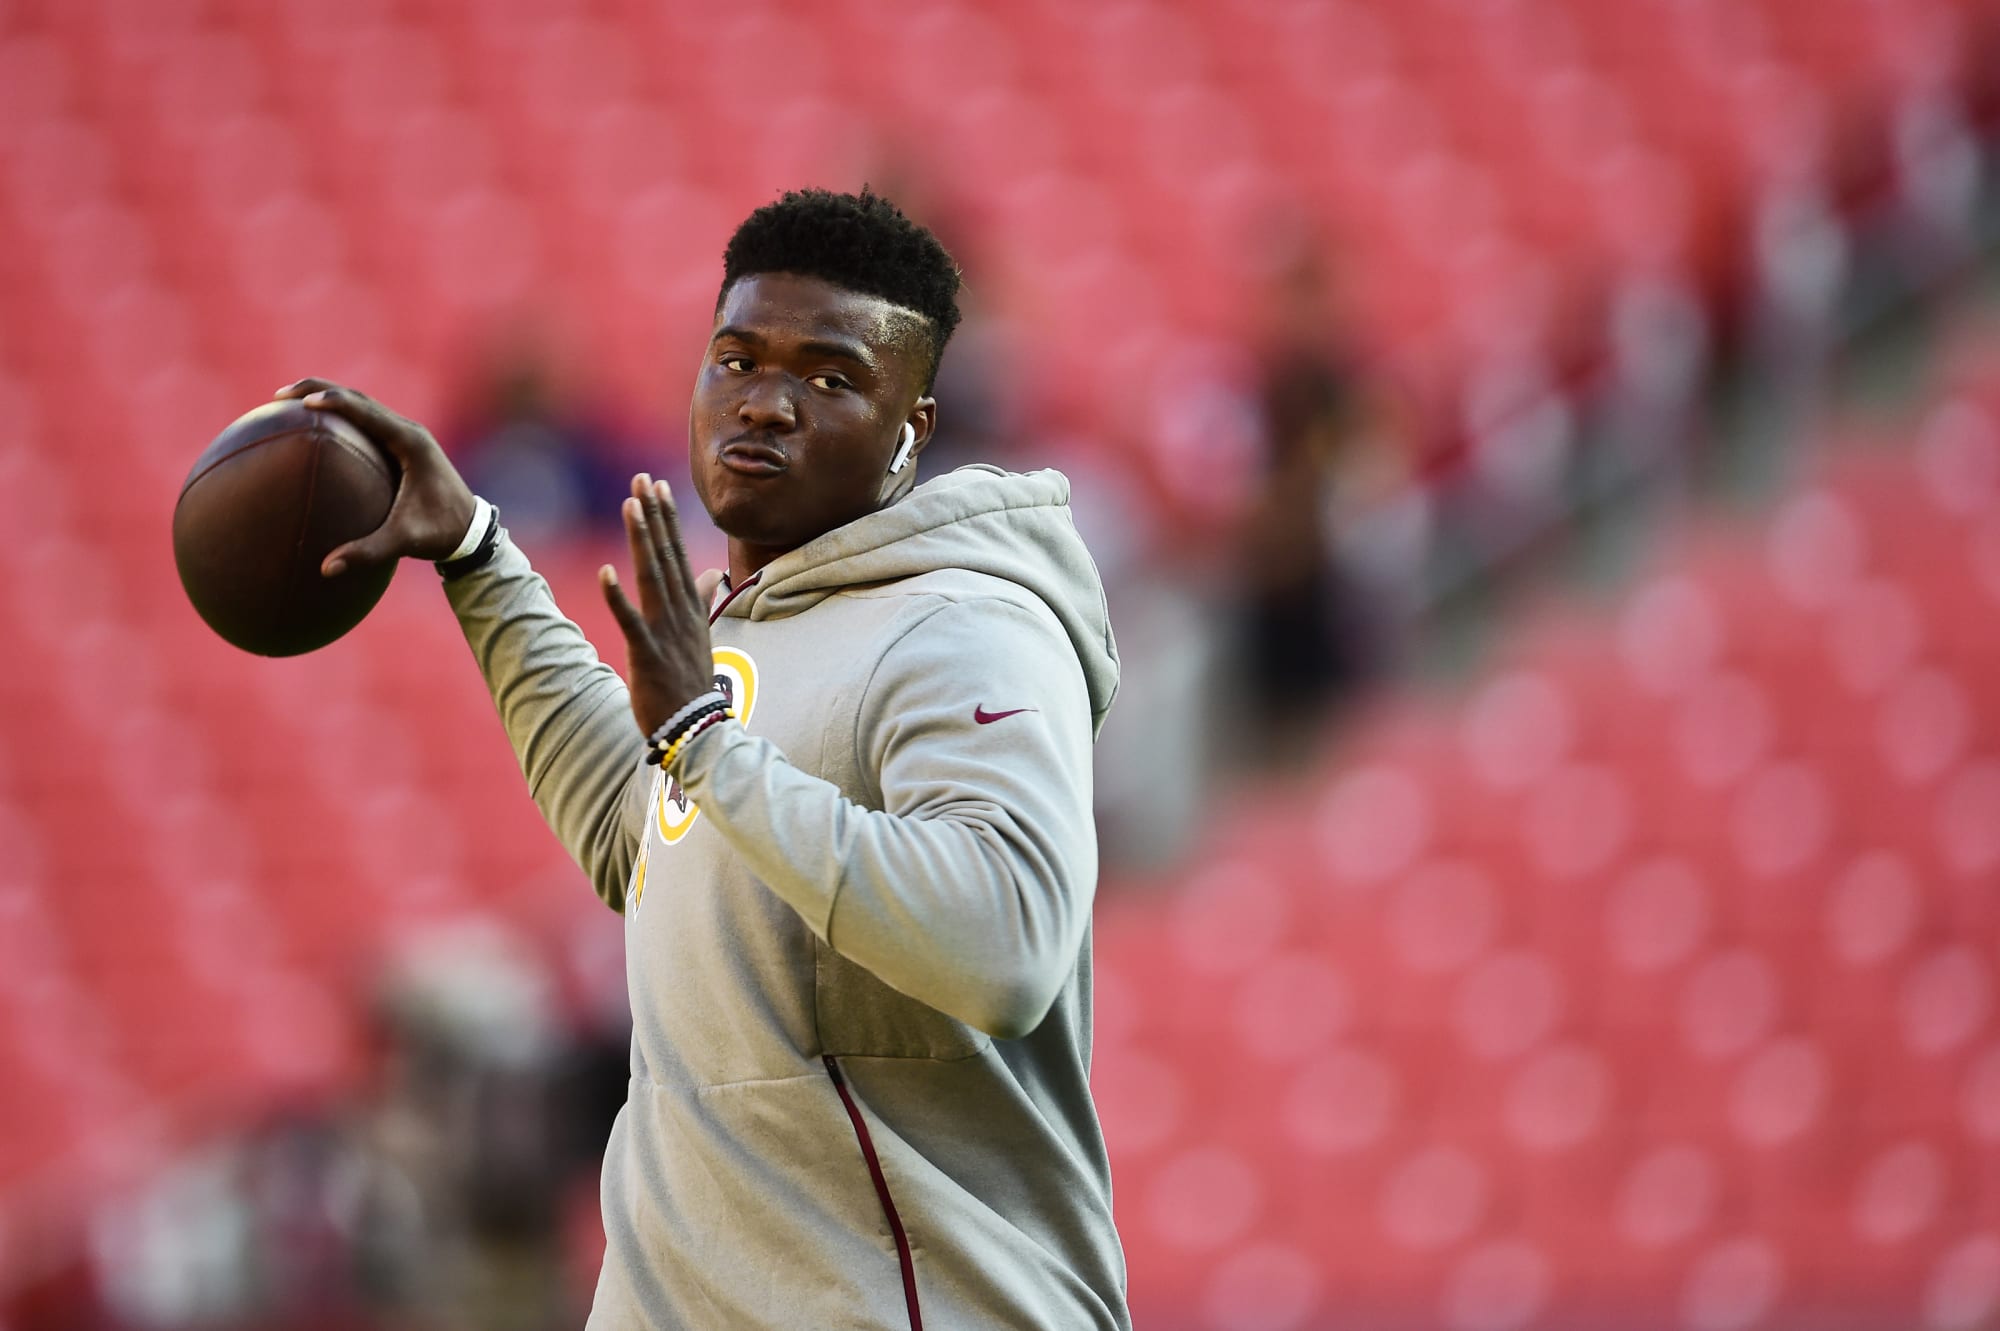 Reports suggest Redskins coach Jay Gruden didn't want Dwayne Haskins